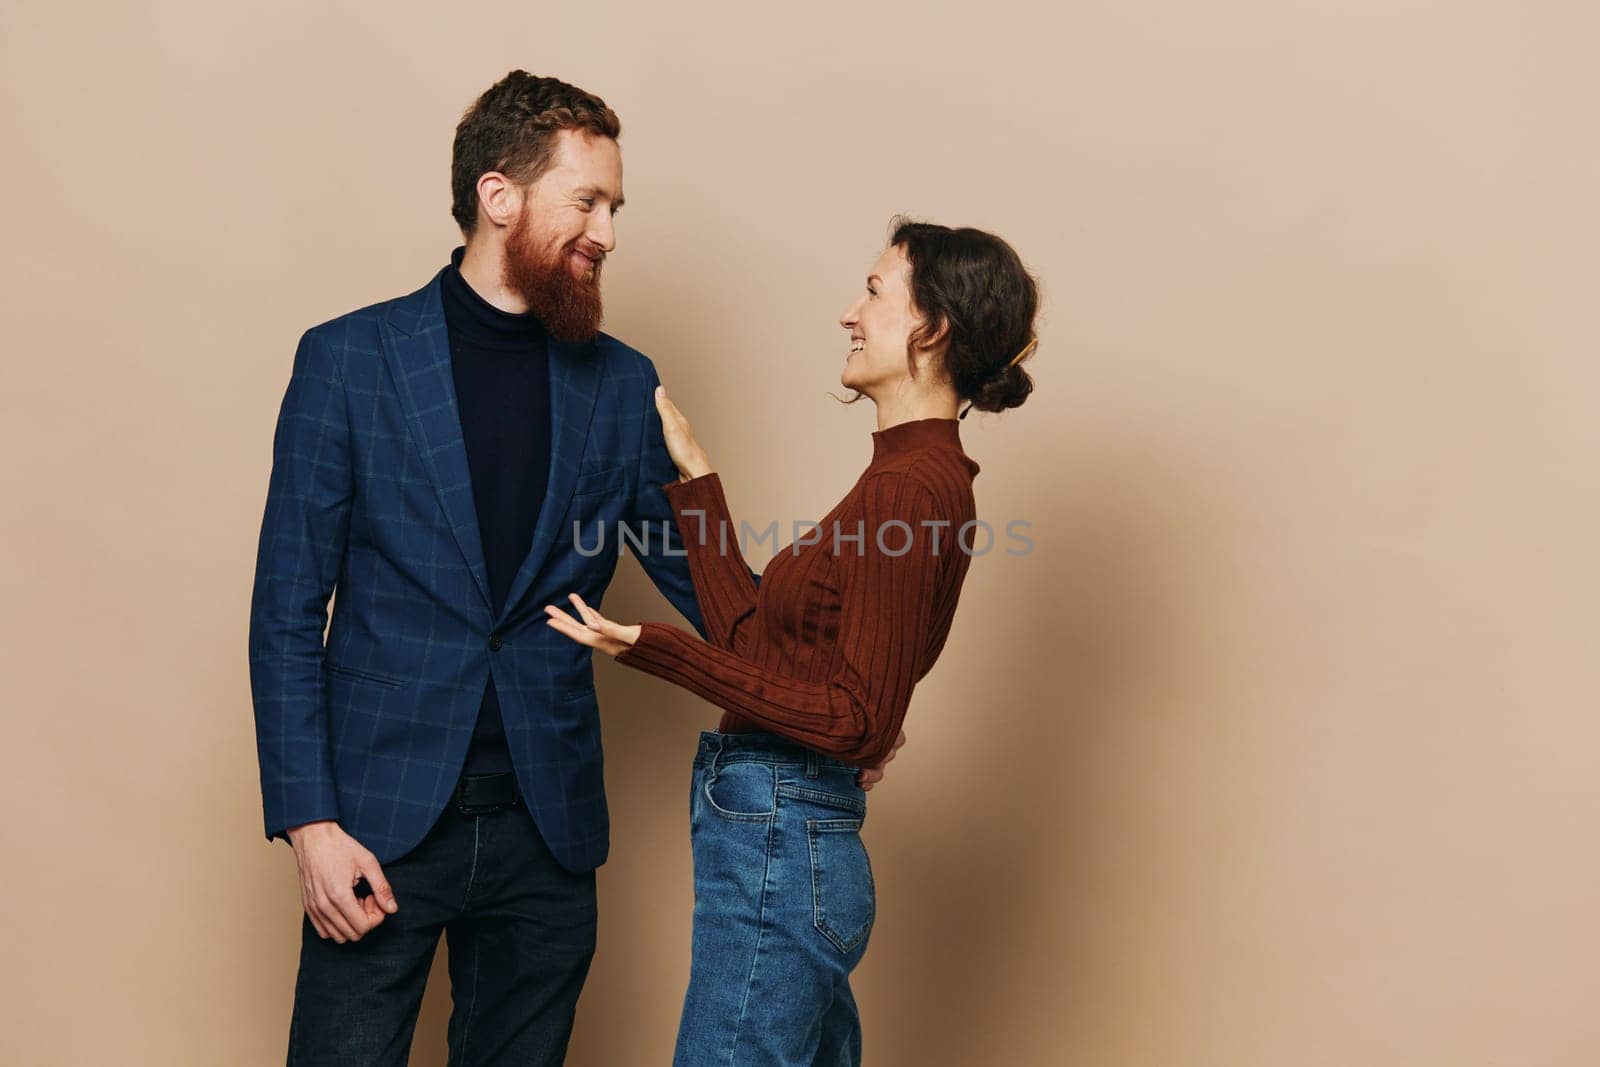 Man and woman couple in a relationship smile and interaction on a beige background in a real relationship between people. High quality photo